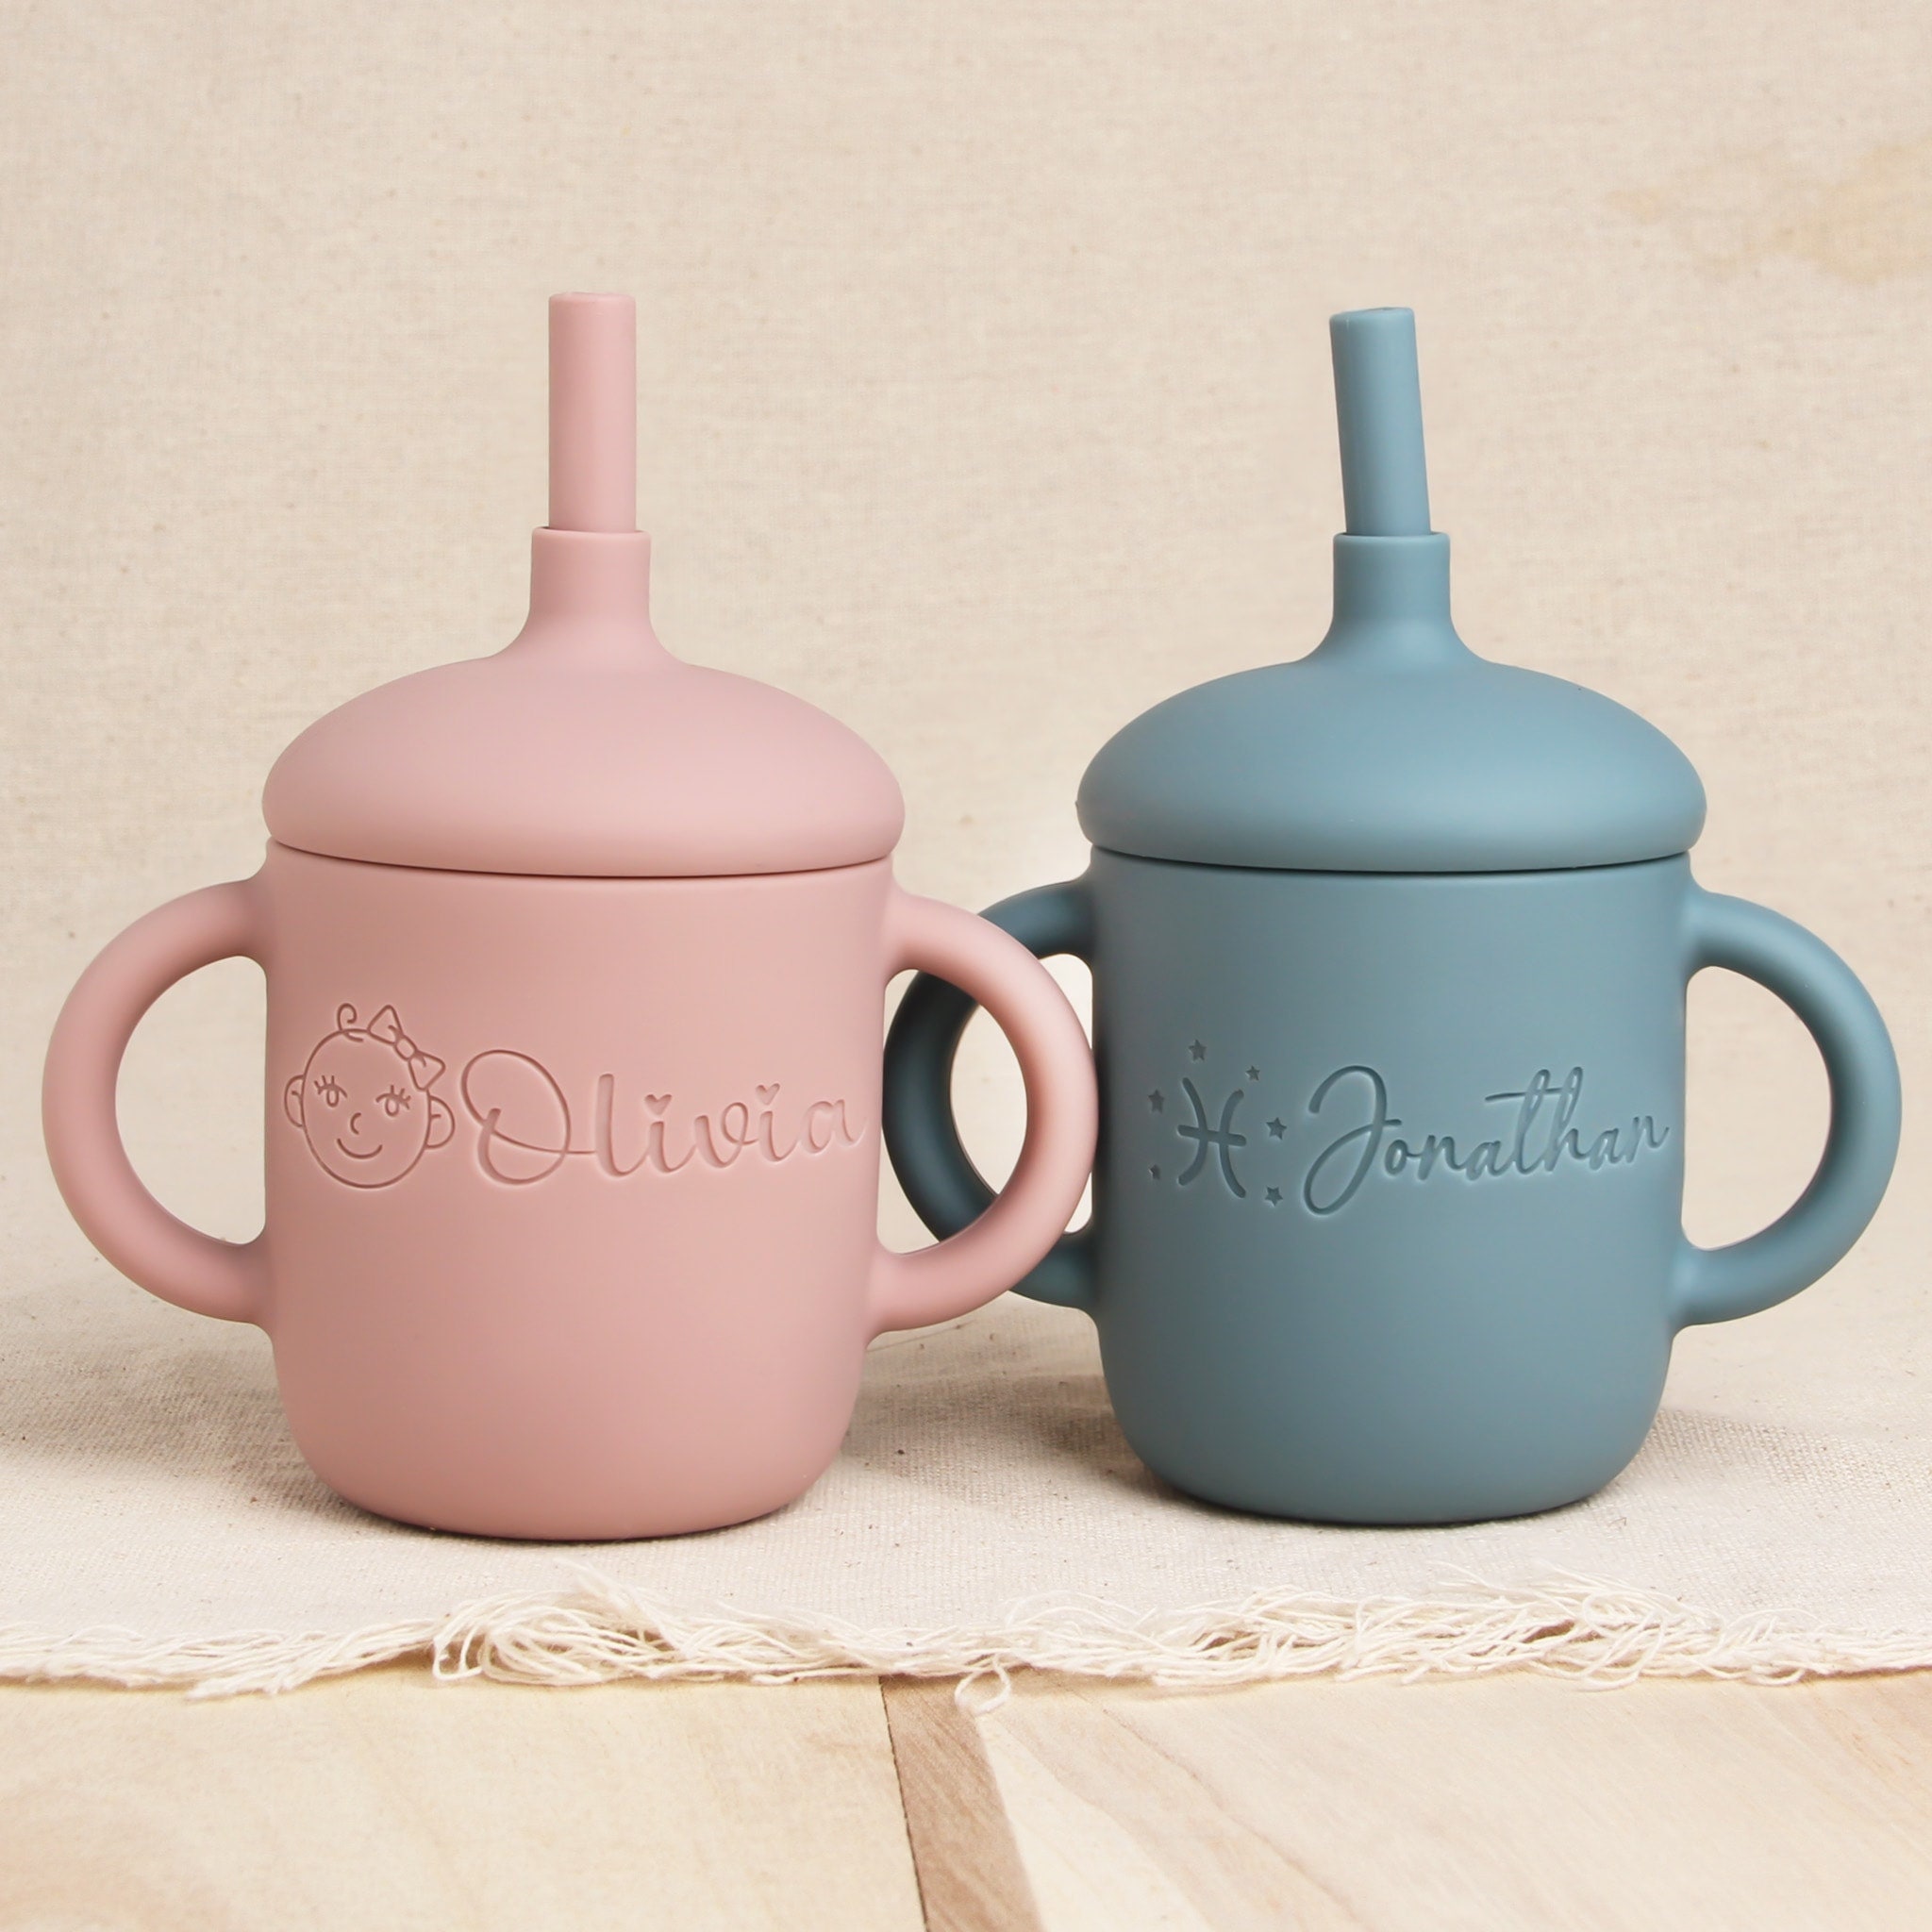 Non-Spill Baby Cup (7 oz) - Sippy Cups with Logo - Q379365 QI